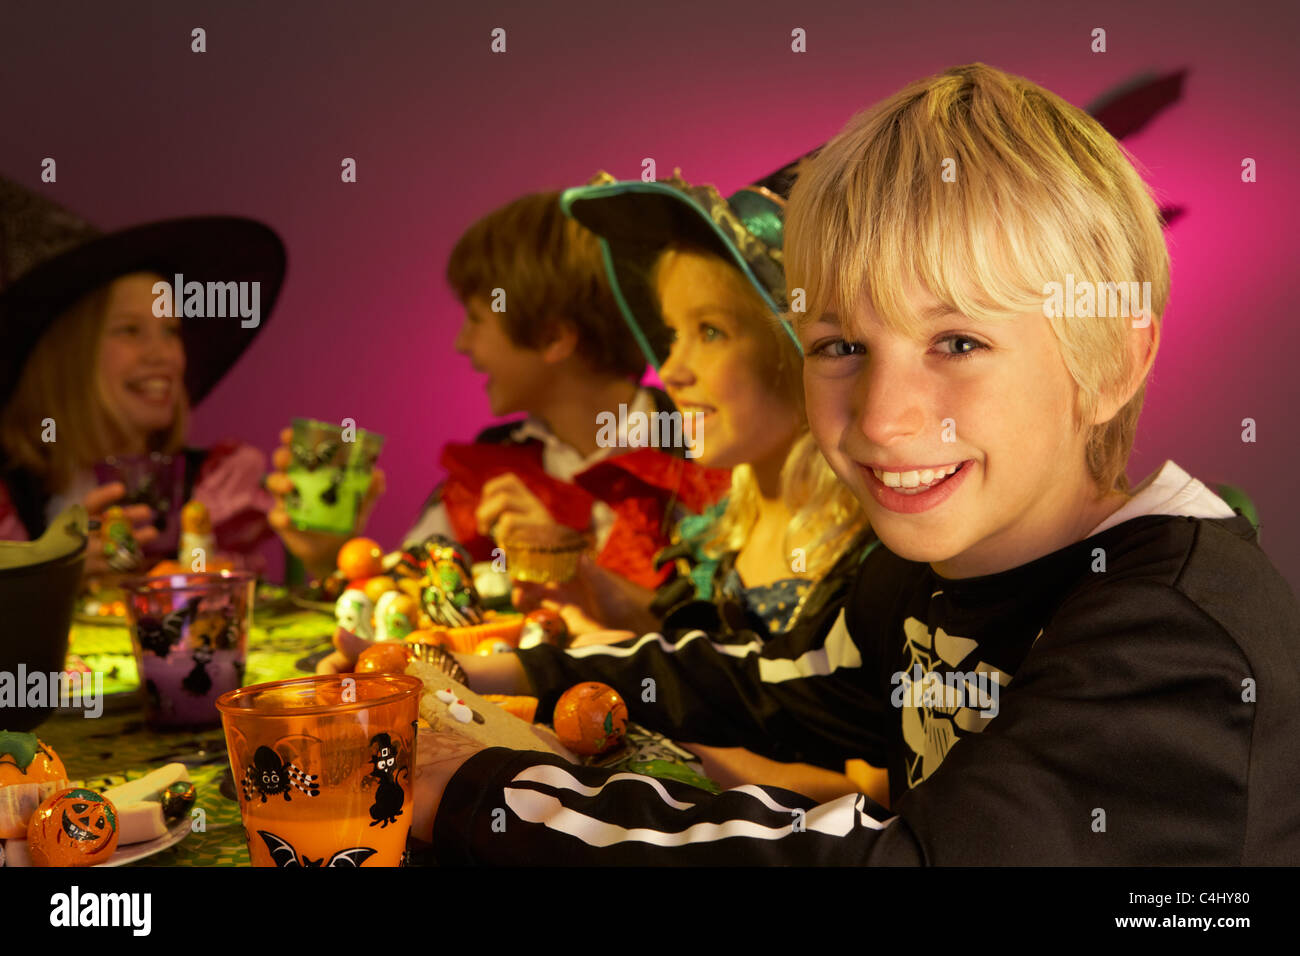 Halloween party with children having fun in fancy costumes Stock Photo